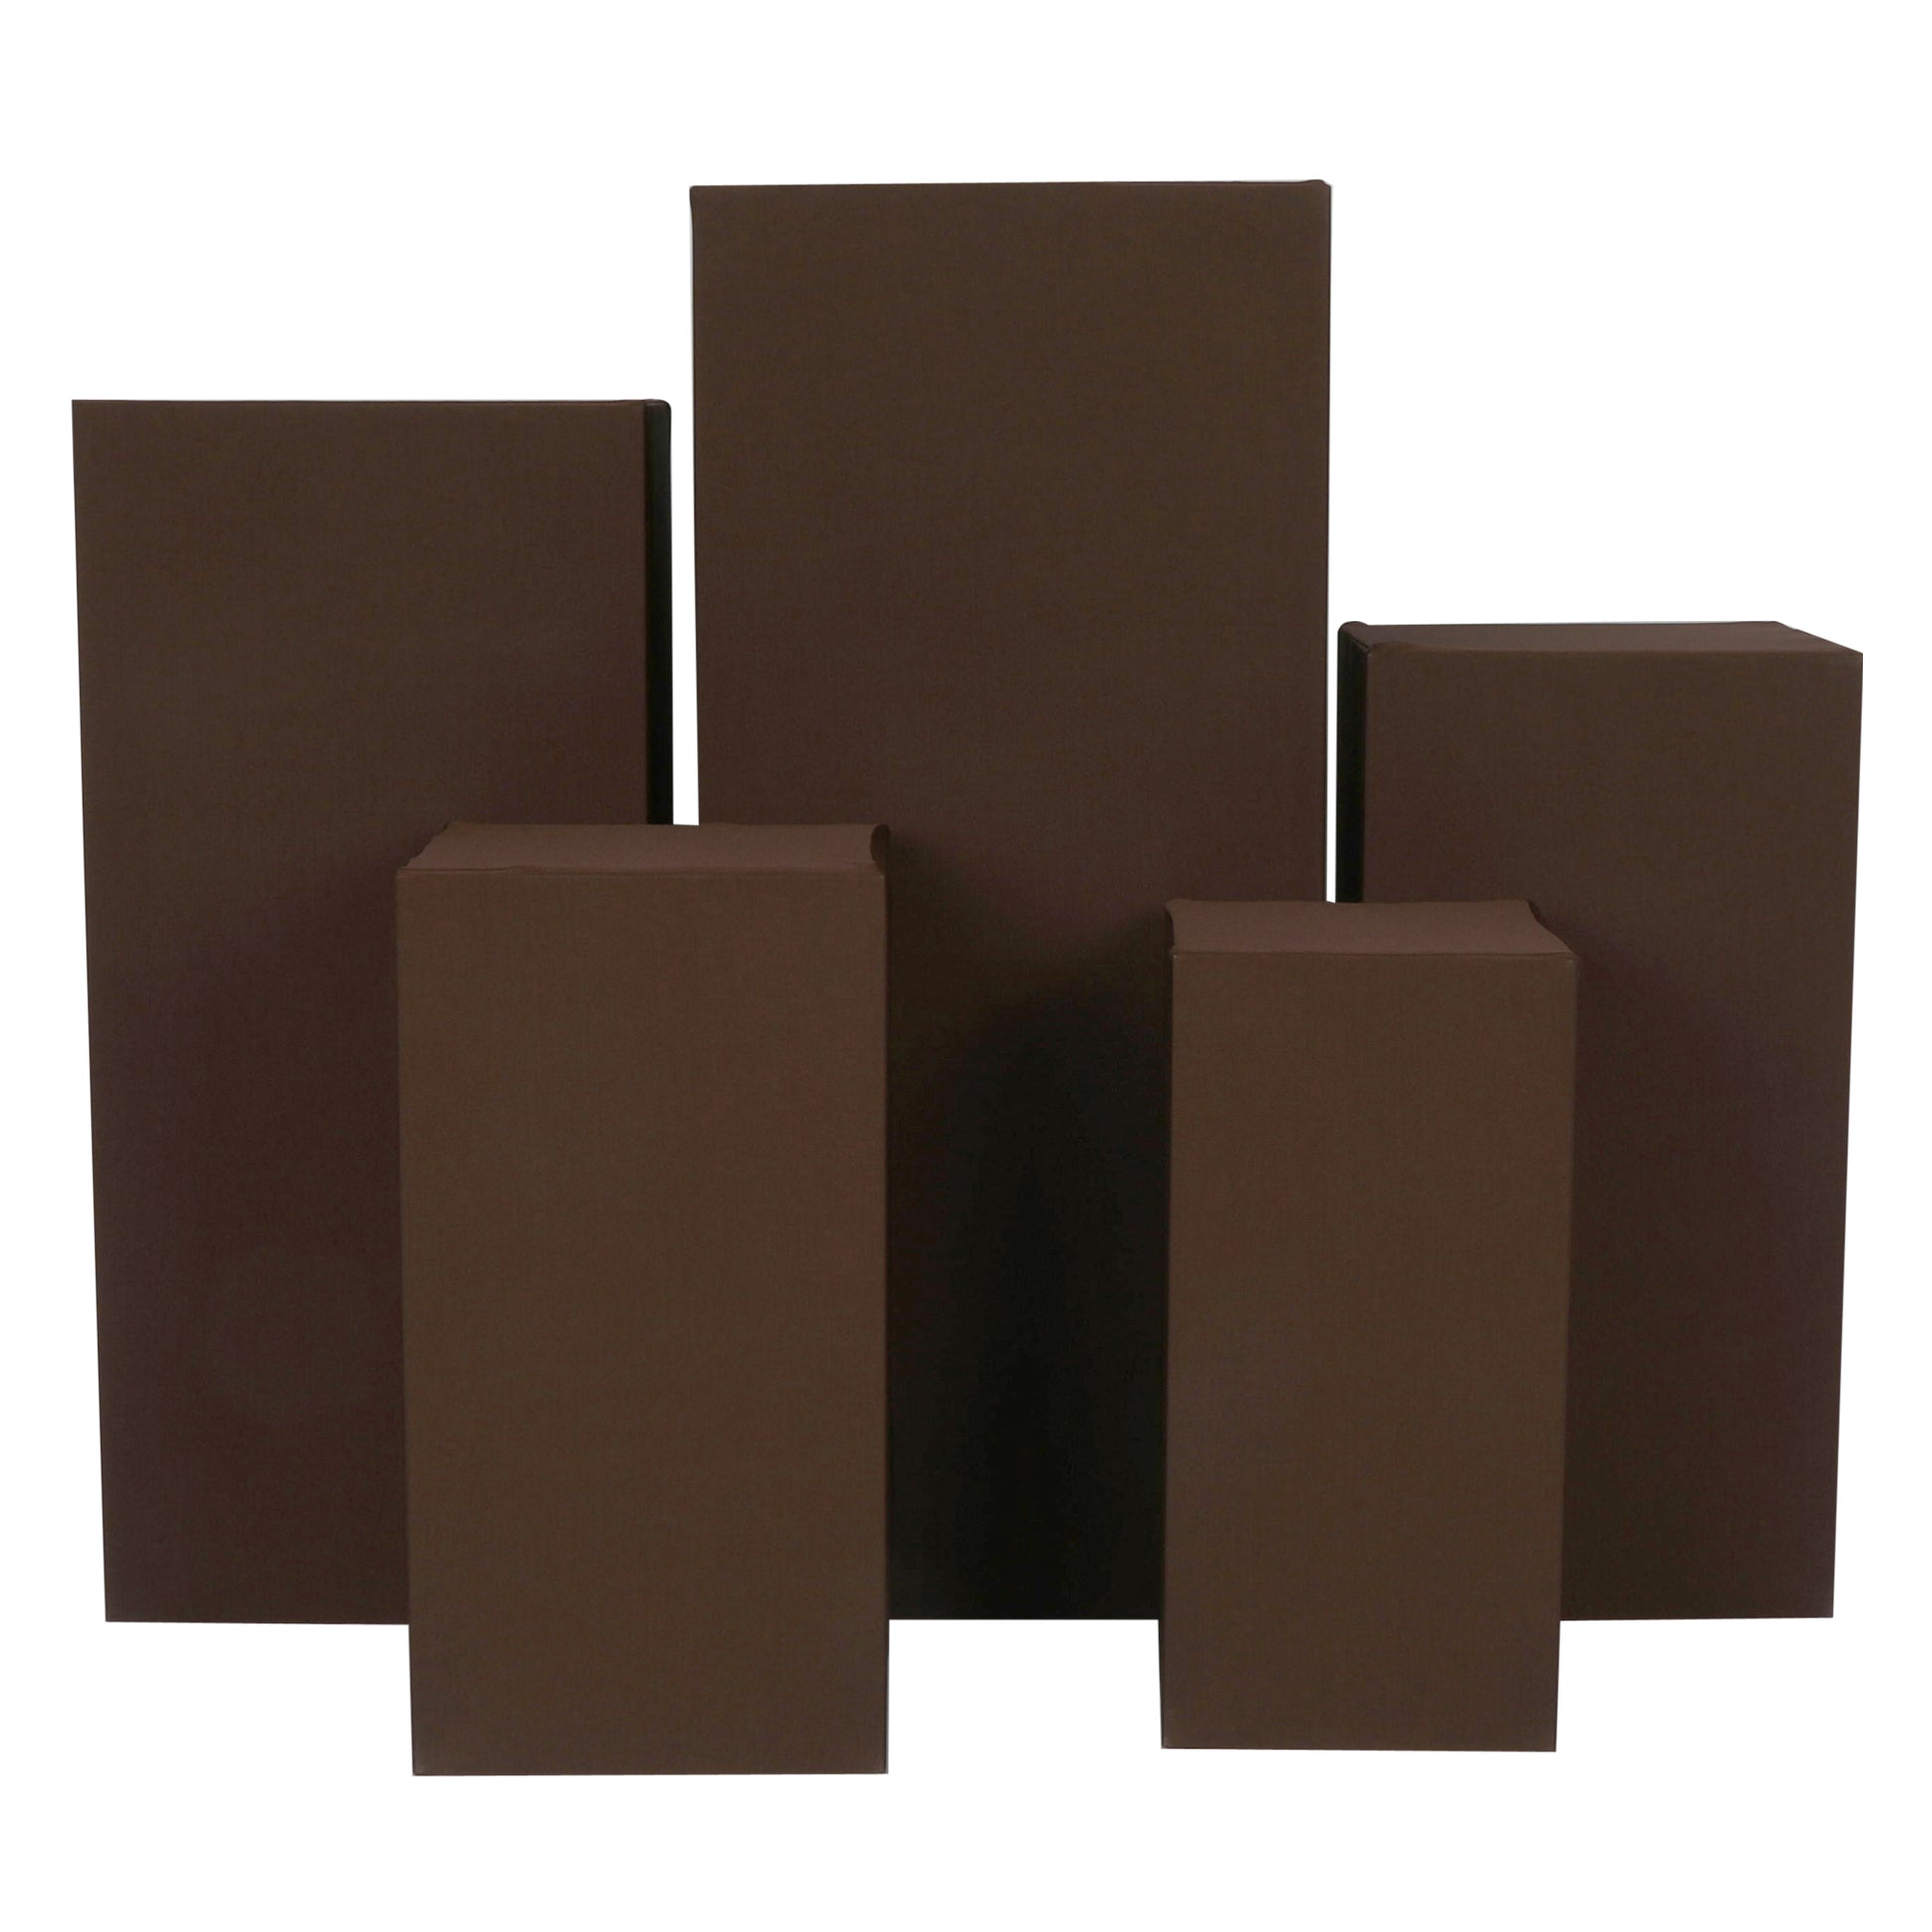 Spandex Covers for Square Metal Pillar Pedestal Stands 5 pcs/set - Chocolate Brown